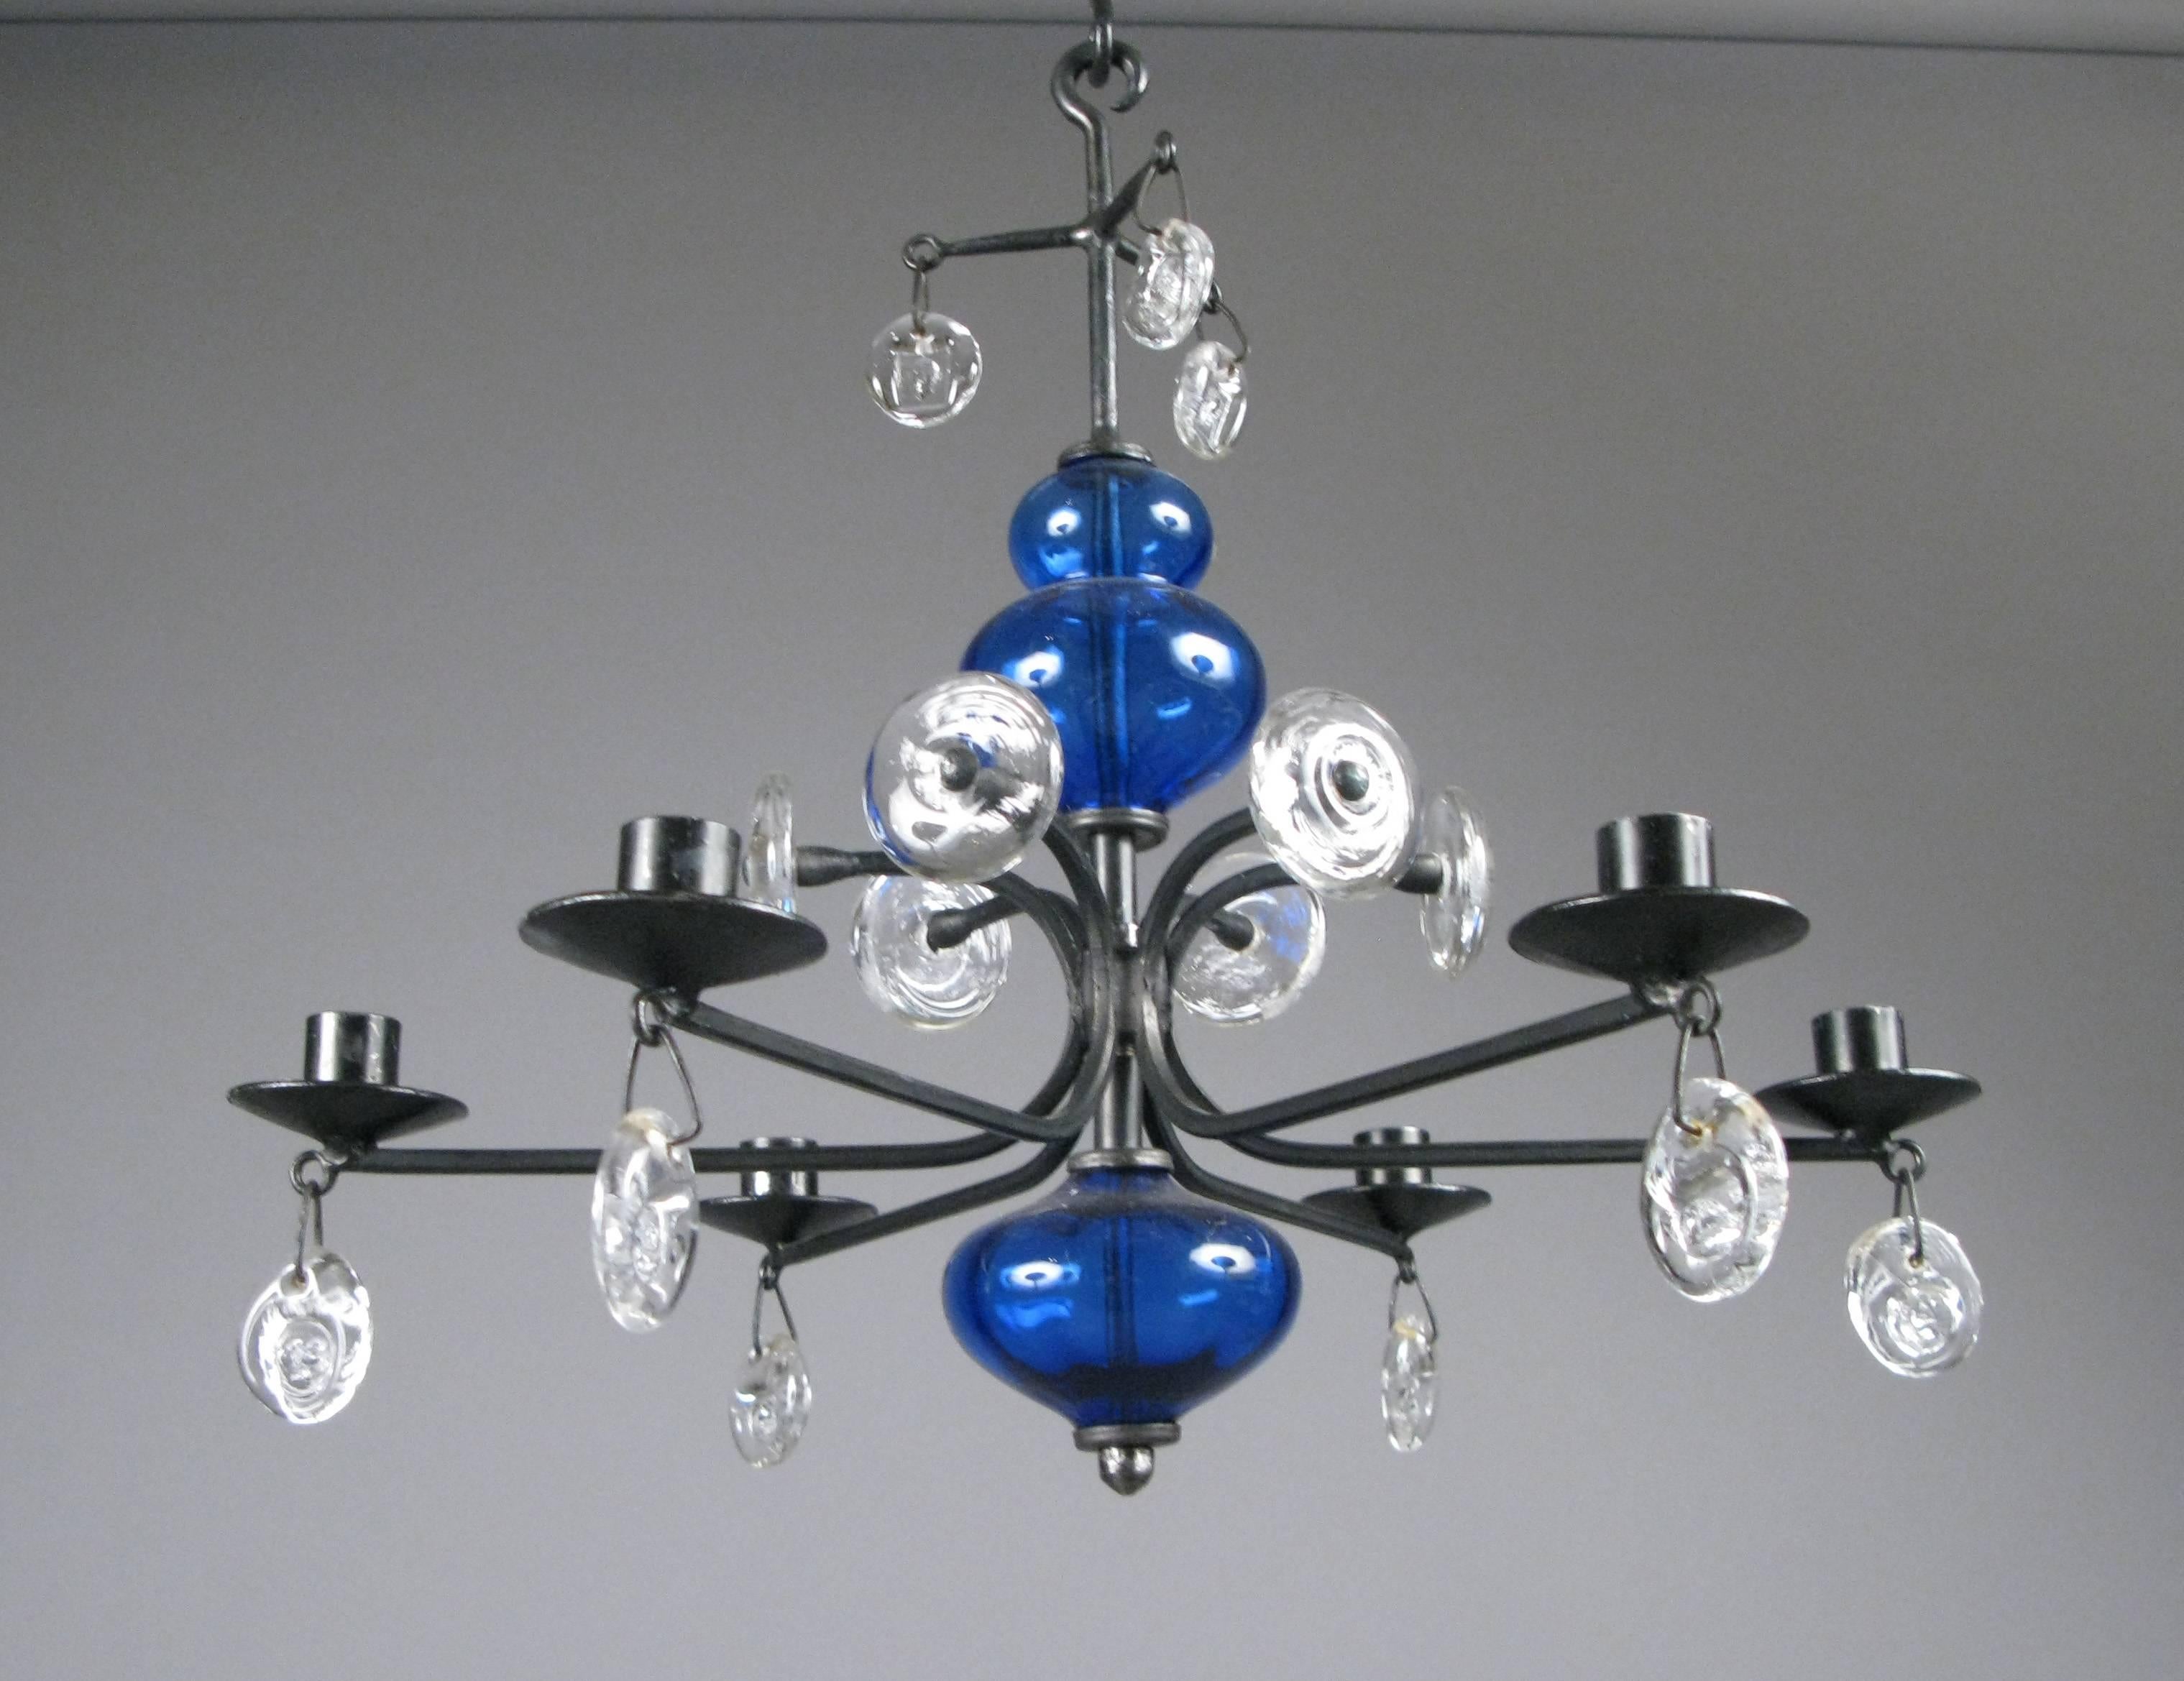 A beautiful iconic 1960s chandelier designed by Erik Hoglund for Kosta Boda, with cobalt blue and white blown glass, and wrought iron frame. With six candle holders, in excellent original condition.